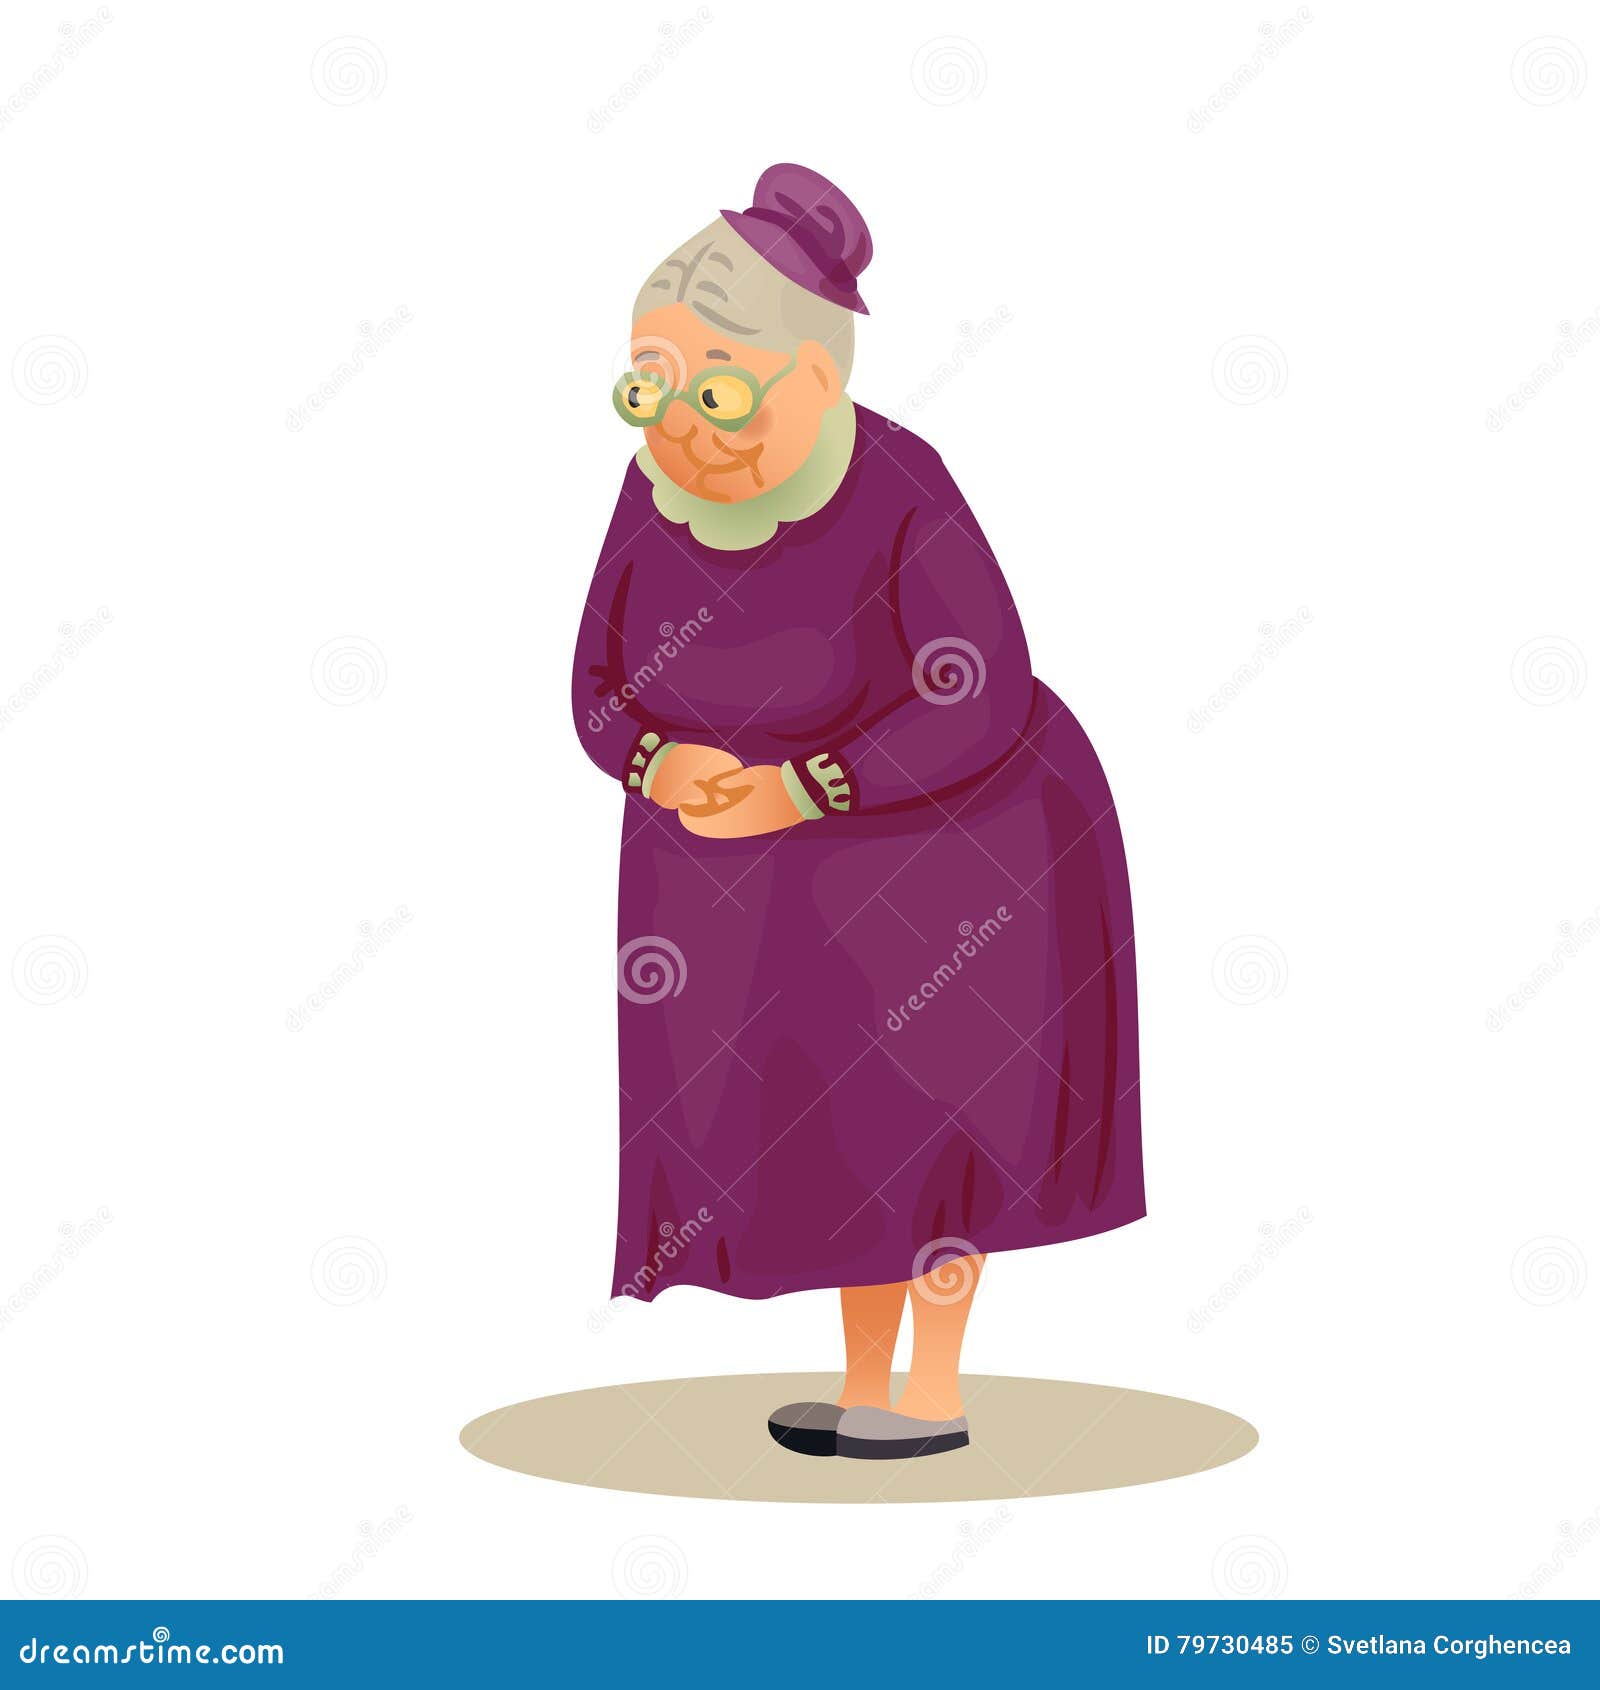 Funny Elderly Lady With Glasses Grandmother Standing With